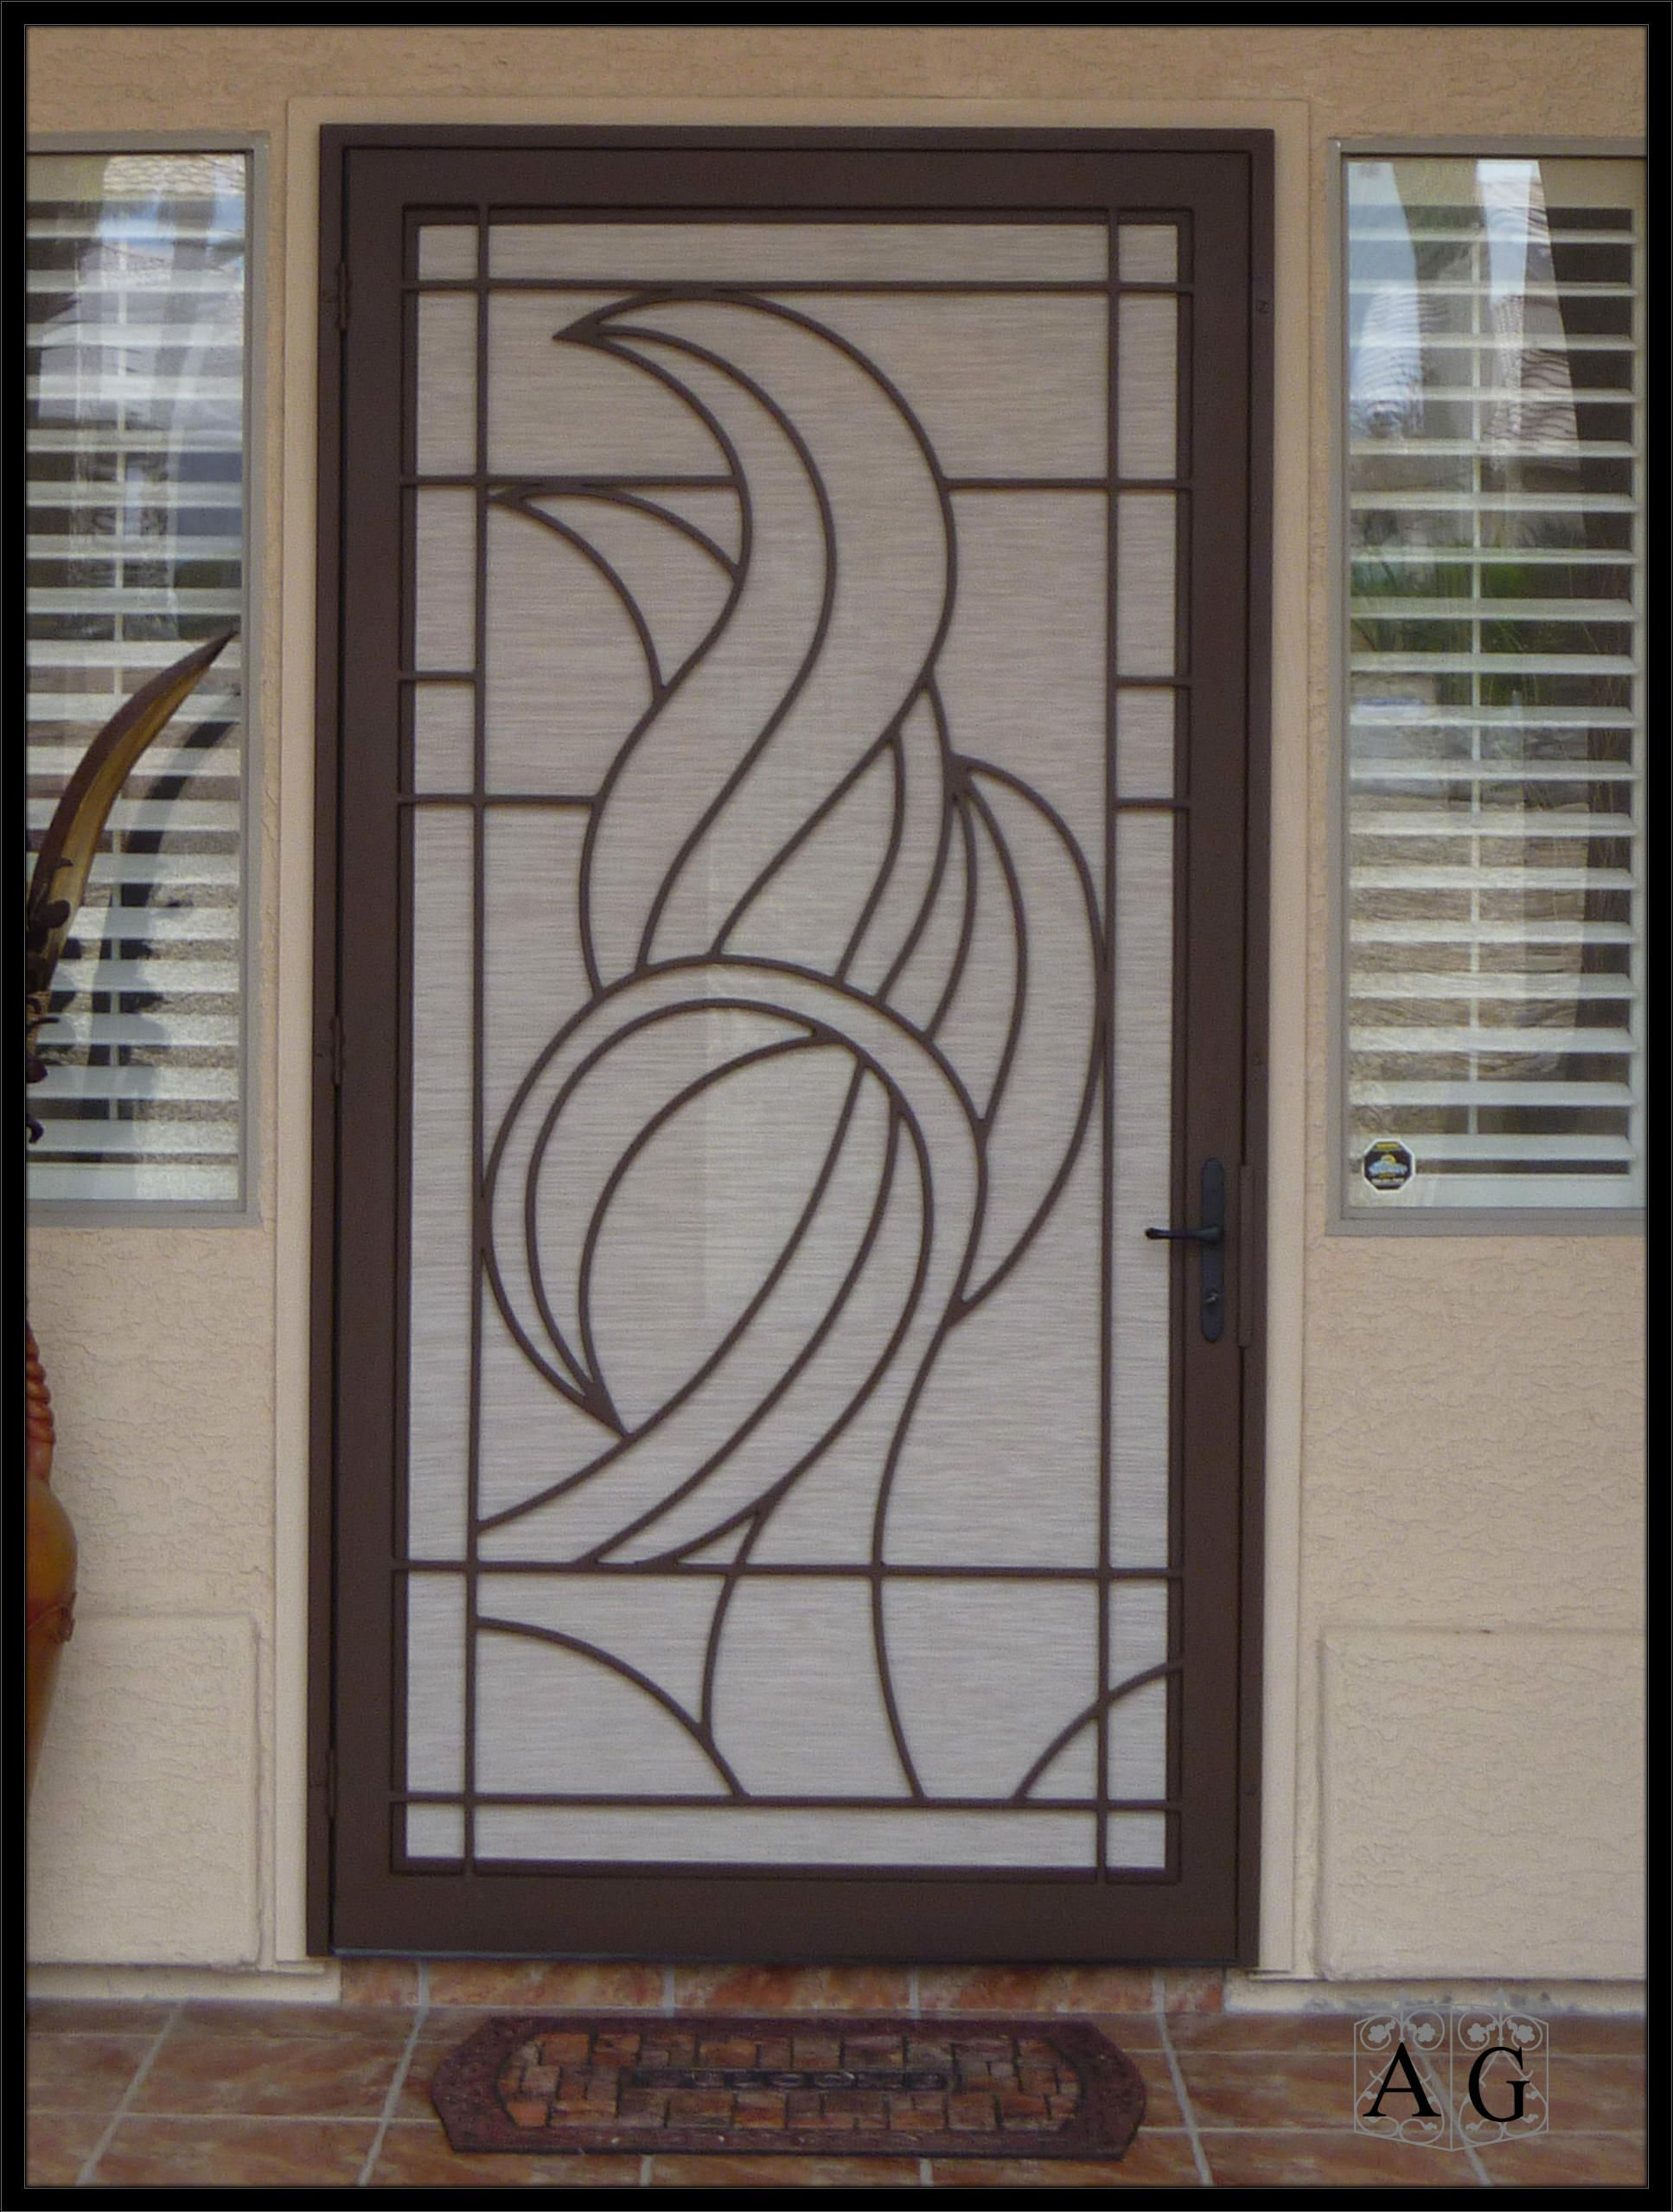 Elegant Storm Doors Facts To Know Before Buying A Storm Door Or with sizing 1935 X 2559